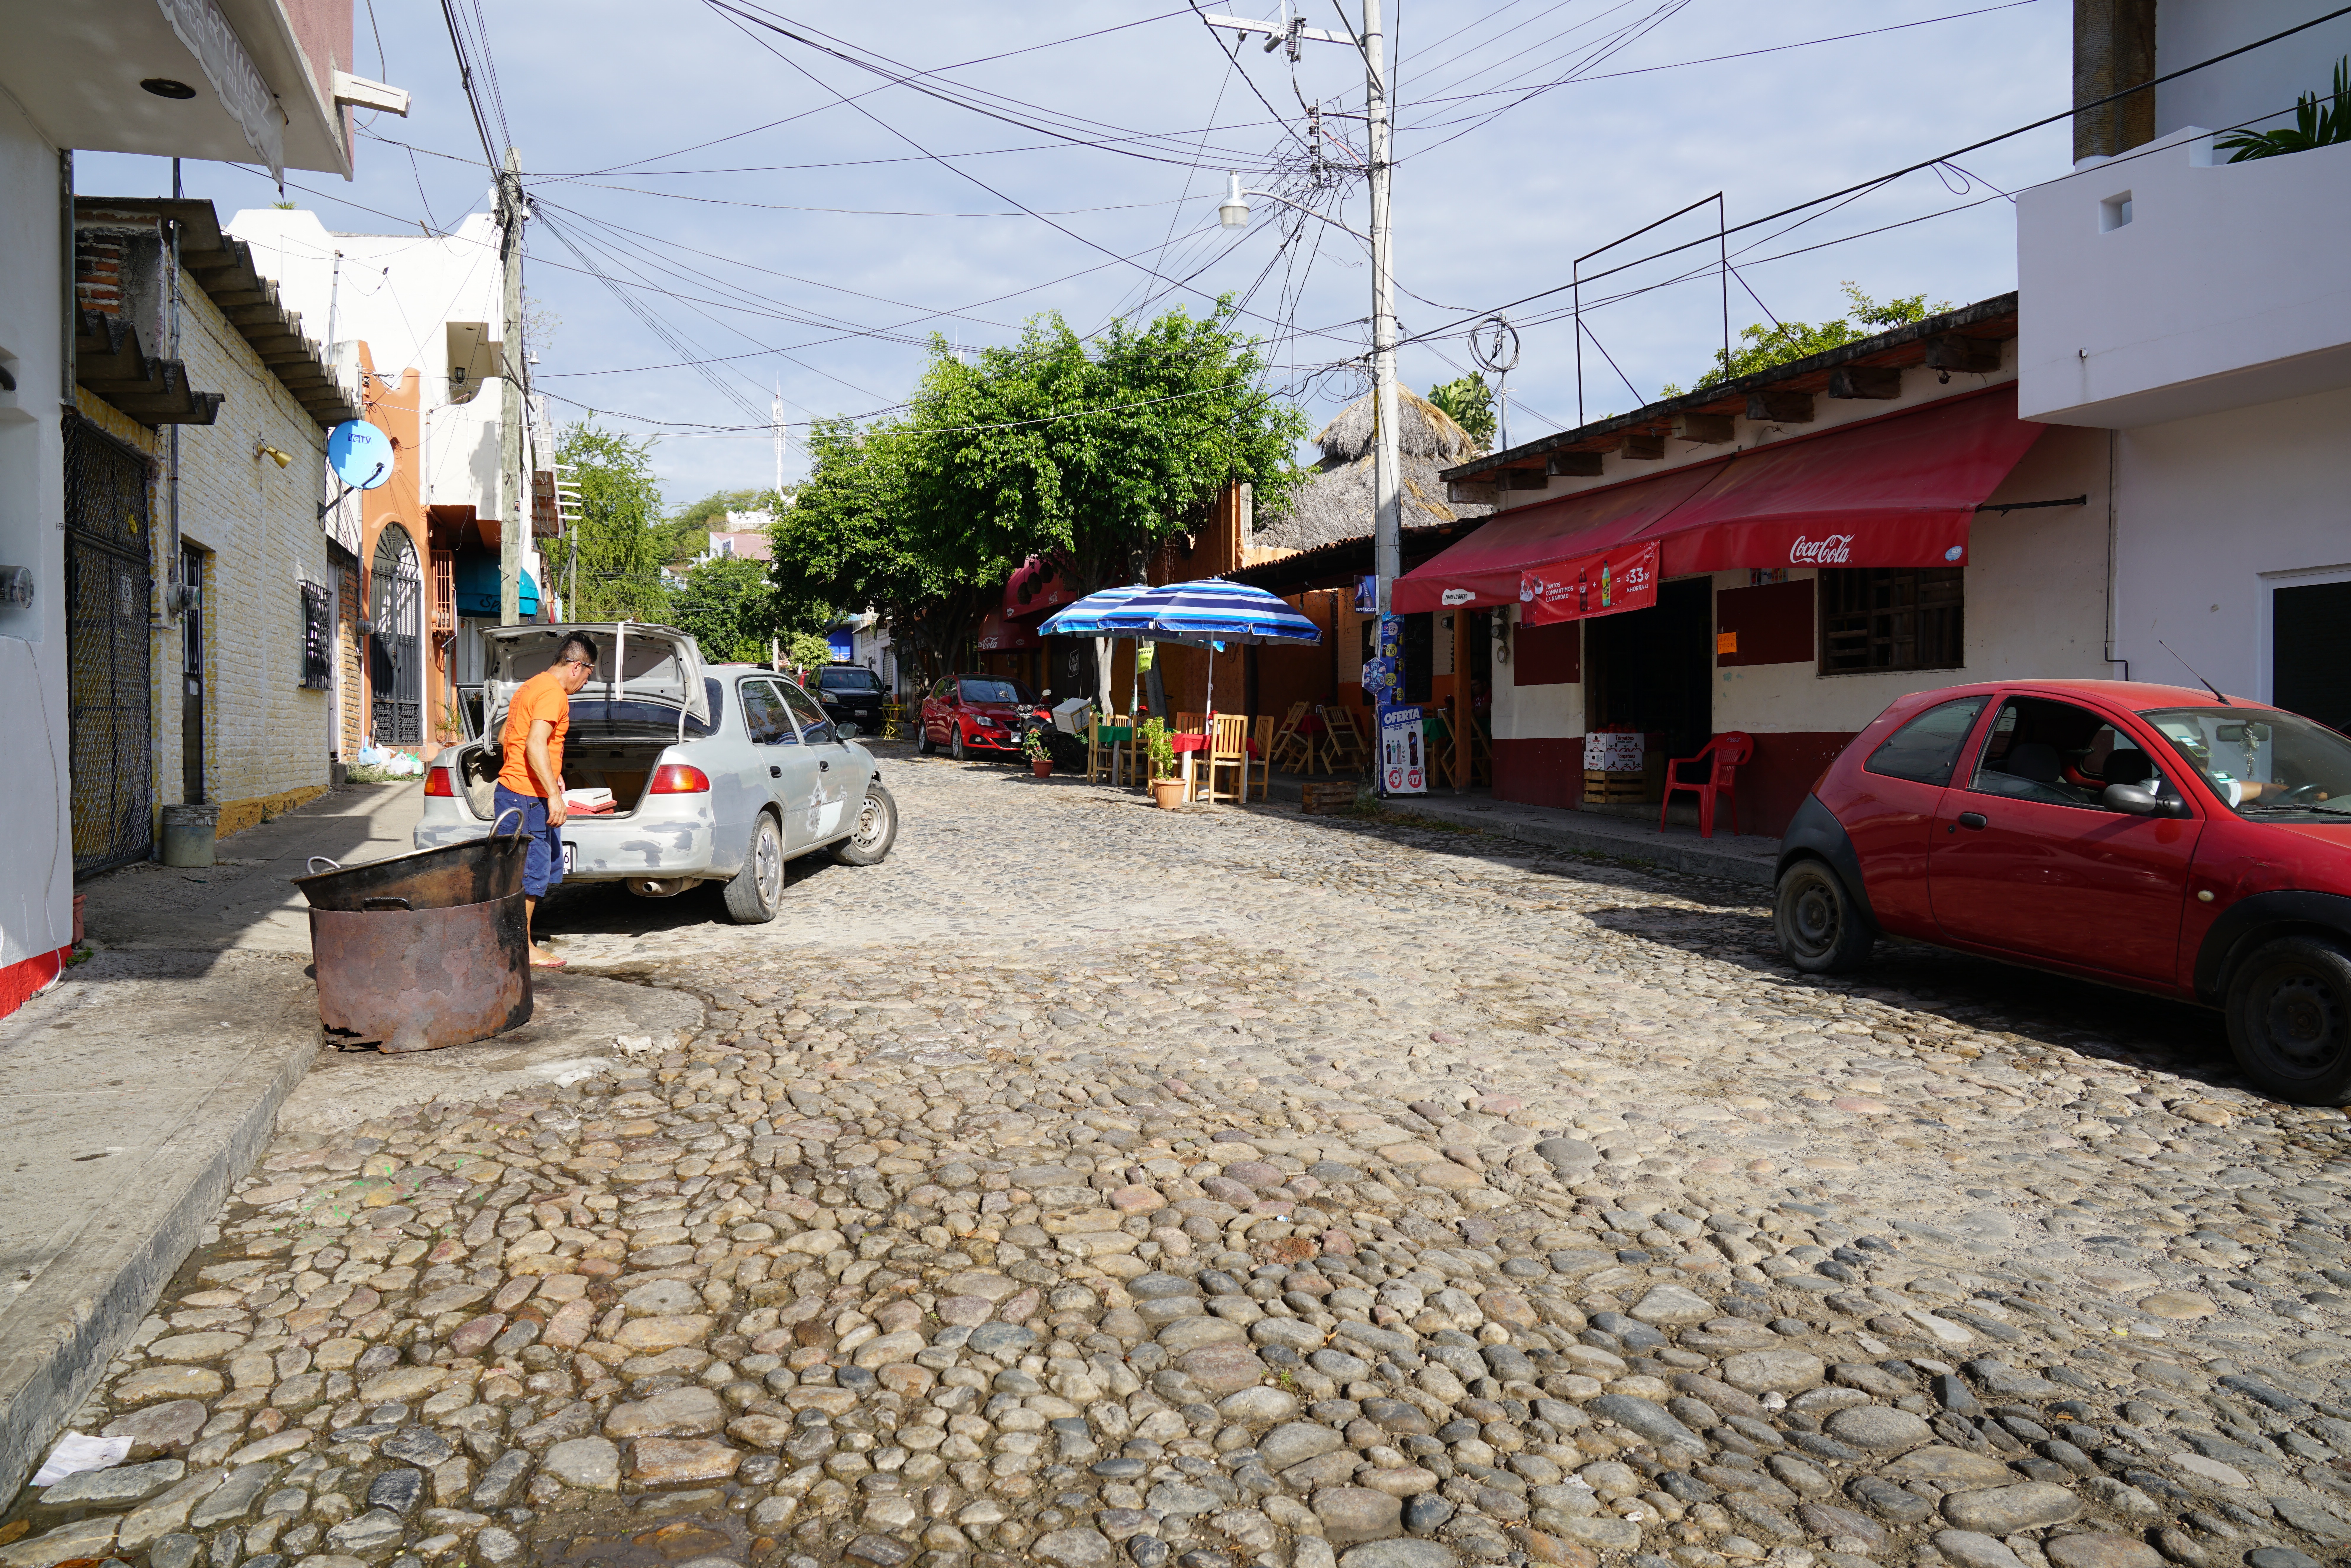 La Cruz streets are quiet during the day